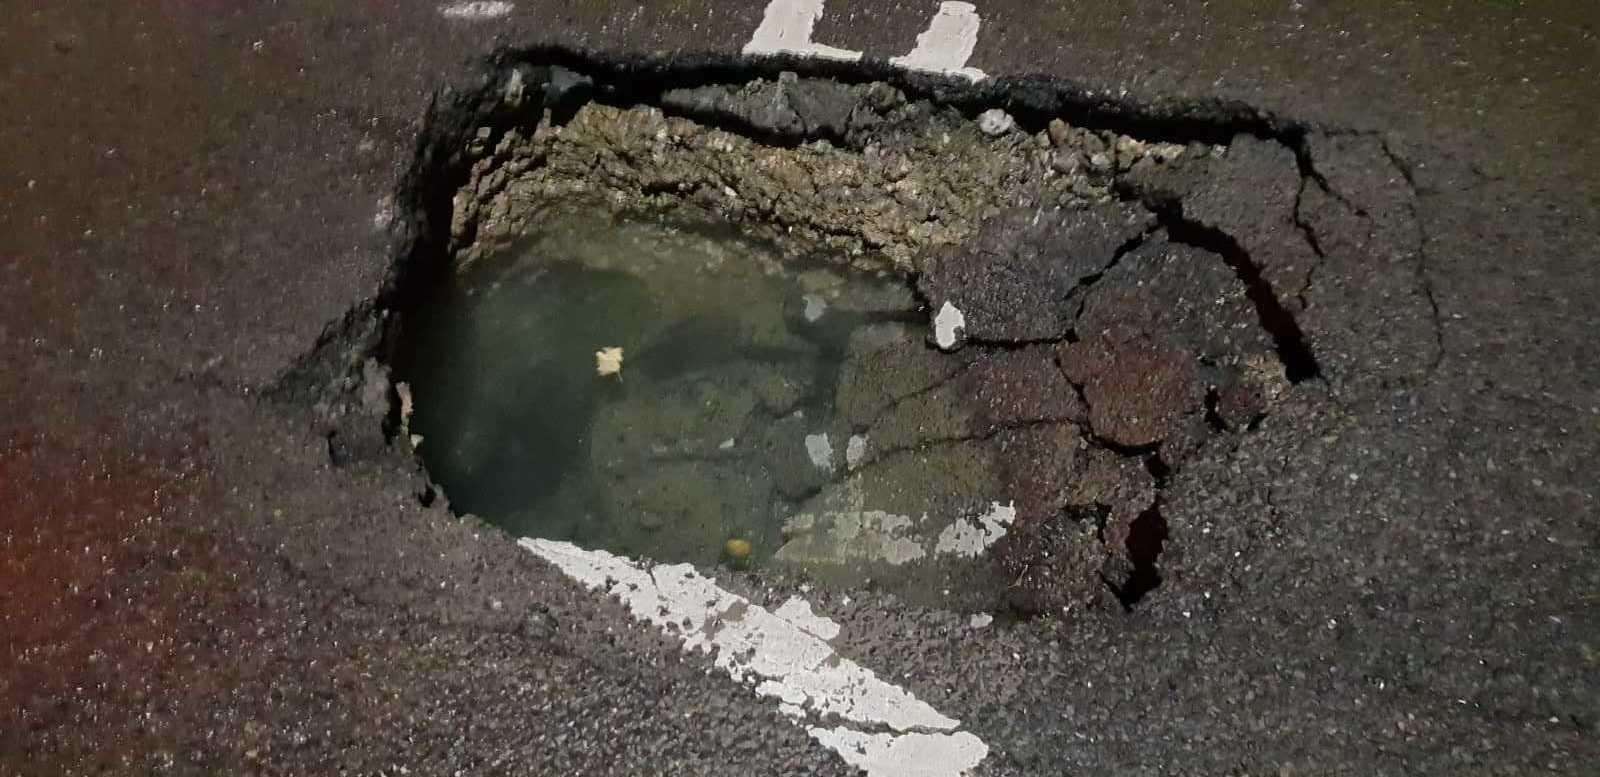 The sinkhole in Brent Hill (5265620)